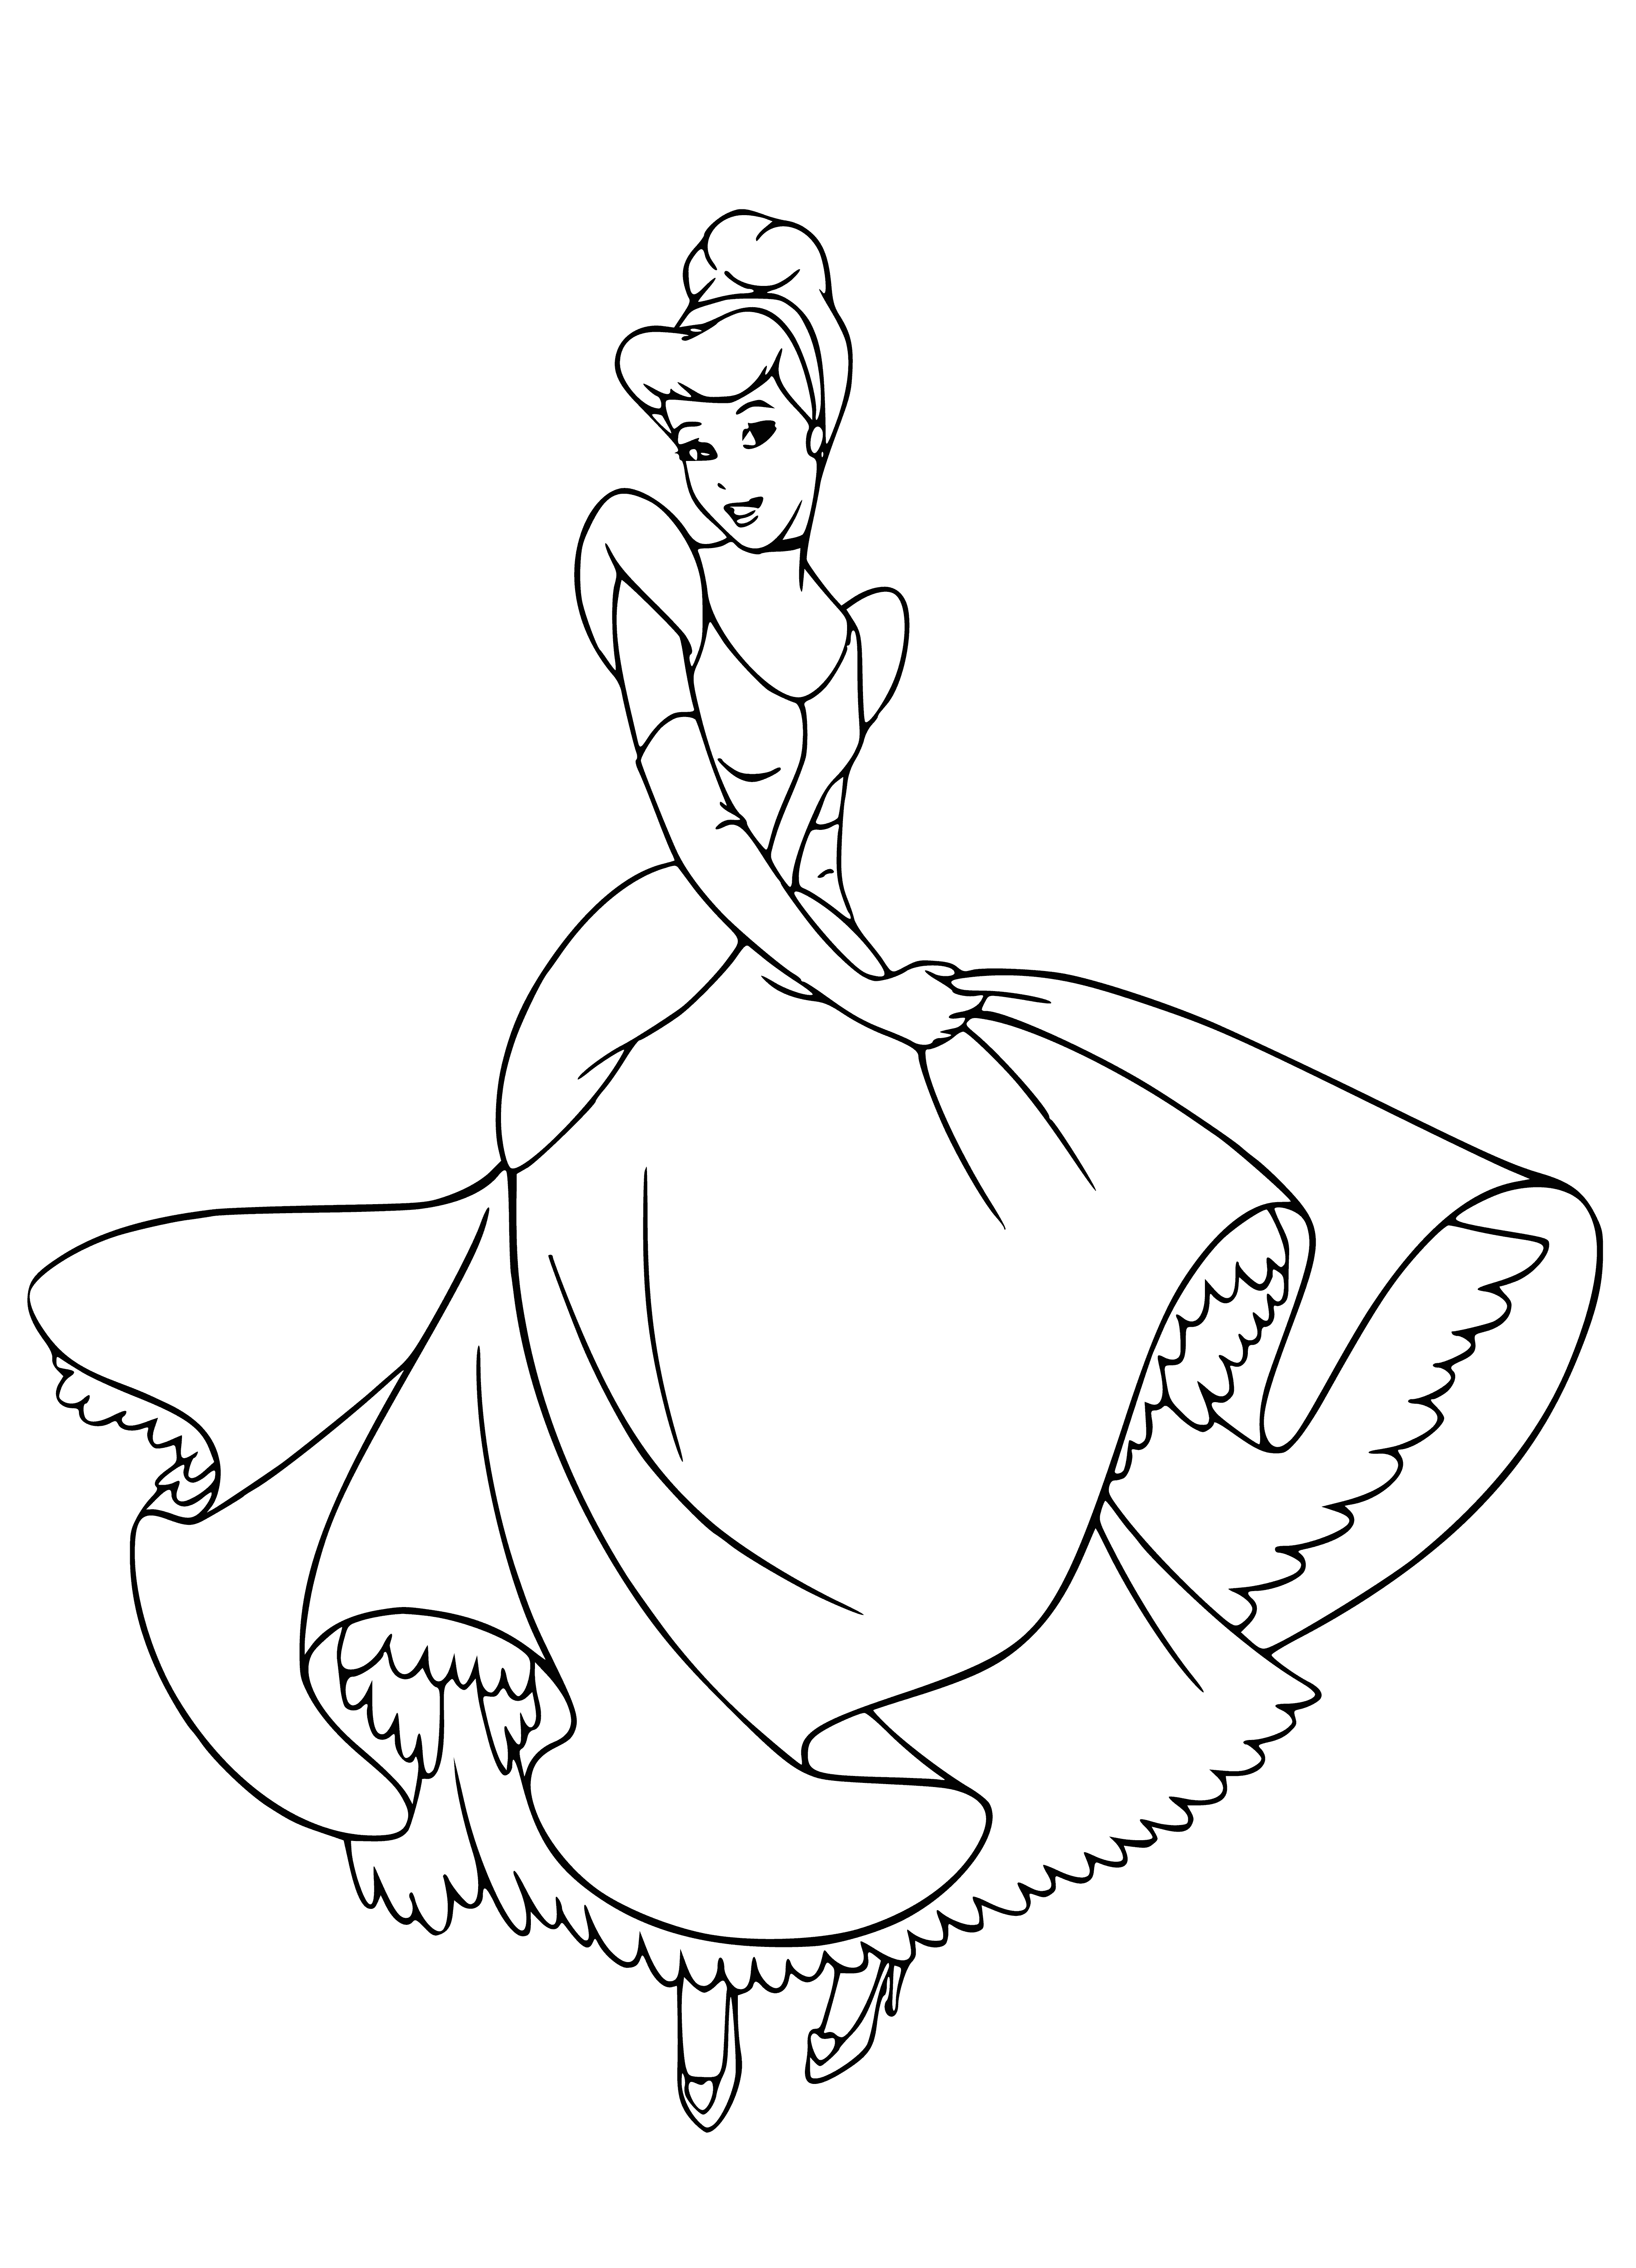 coloring page: Woman in blue ball gown w/ long skirt, tight bodice, blonde hair pulled back, wearing diamond necklace & earrings.